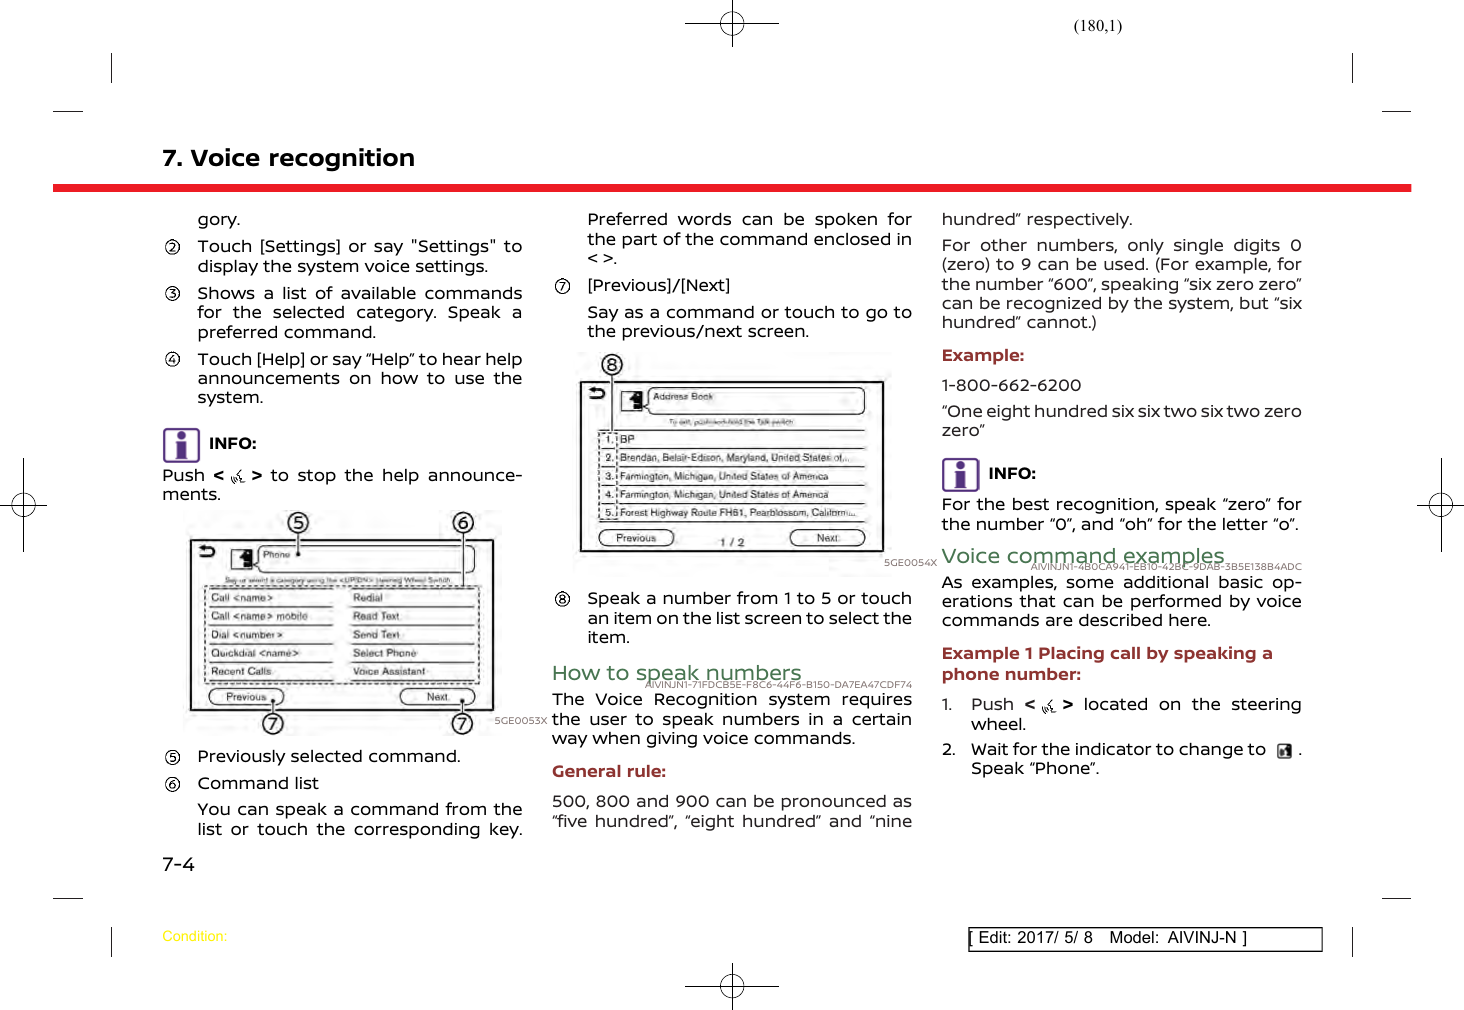 Page 180 of Robert Bosch Car Multimedia AIVICMFB0 Navigation System with Bluetooth and WLAN User Manual